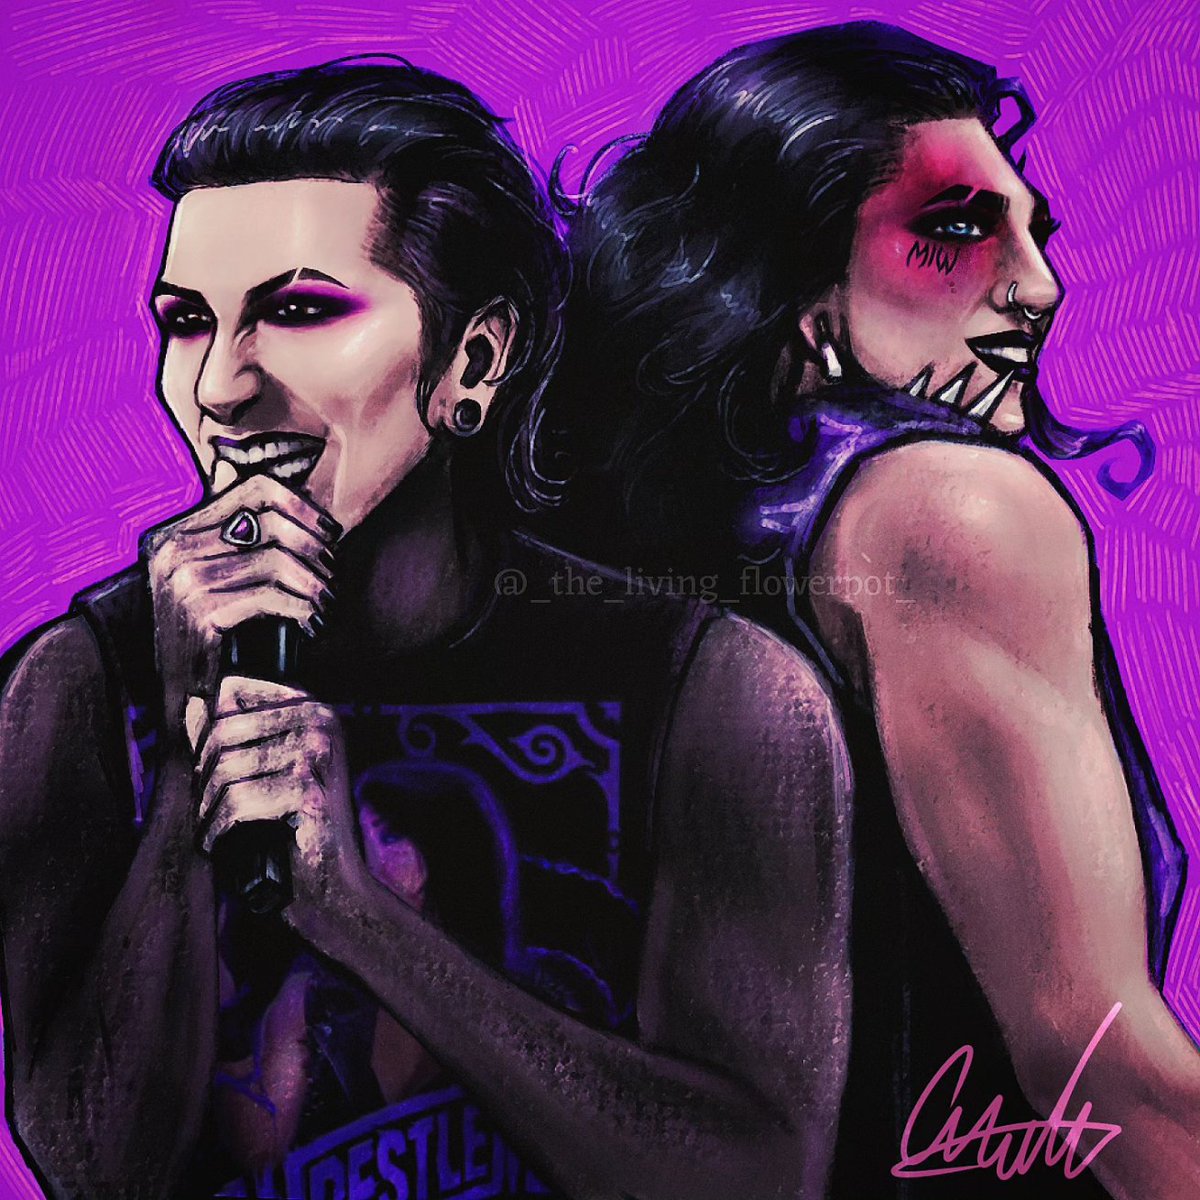 Motionless in White performing with Rhea Ripley for her entrance at Wrestlemania XL was such an iconic moment fr, i just had to draw something from it ! :3
#RheaRipley #chrismotionless #wwe #miw #motionlessinwhite